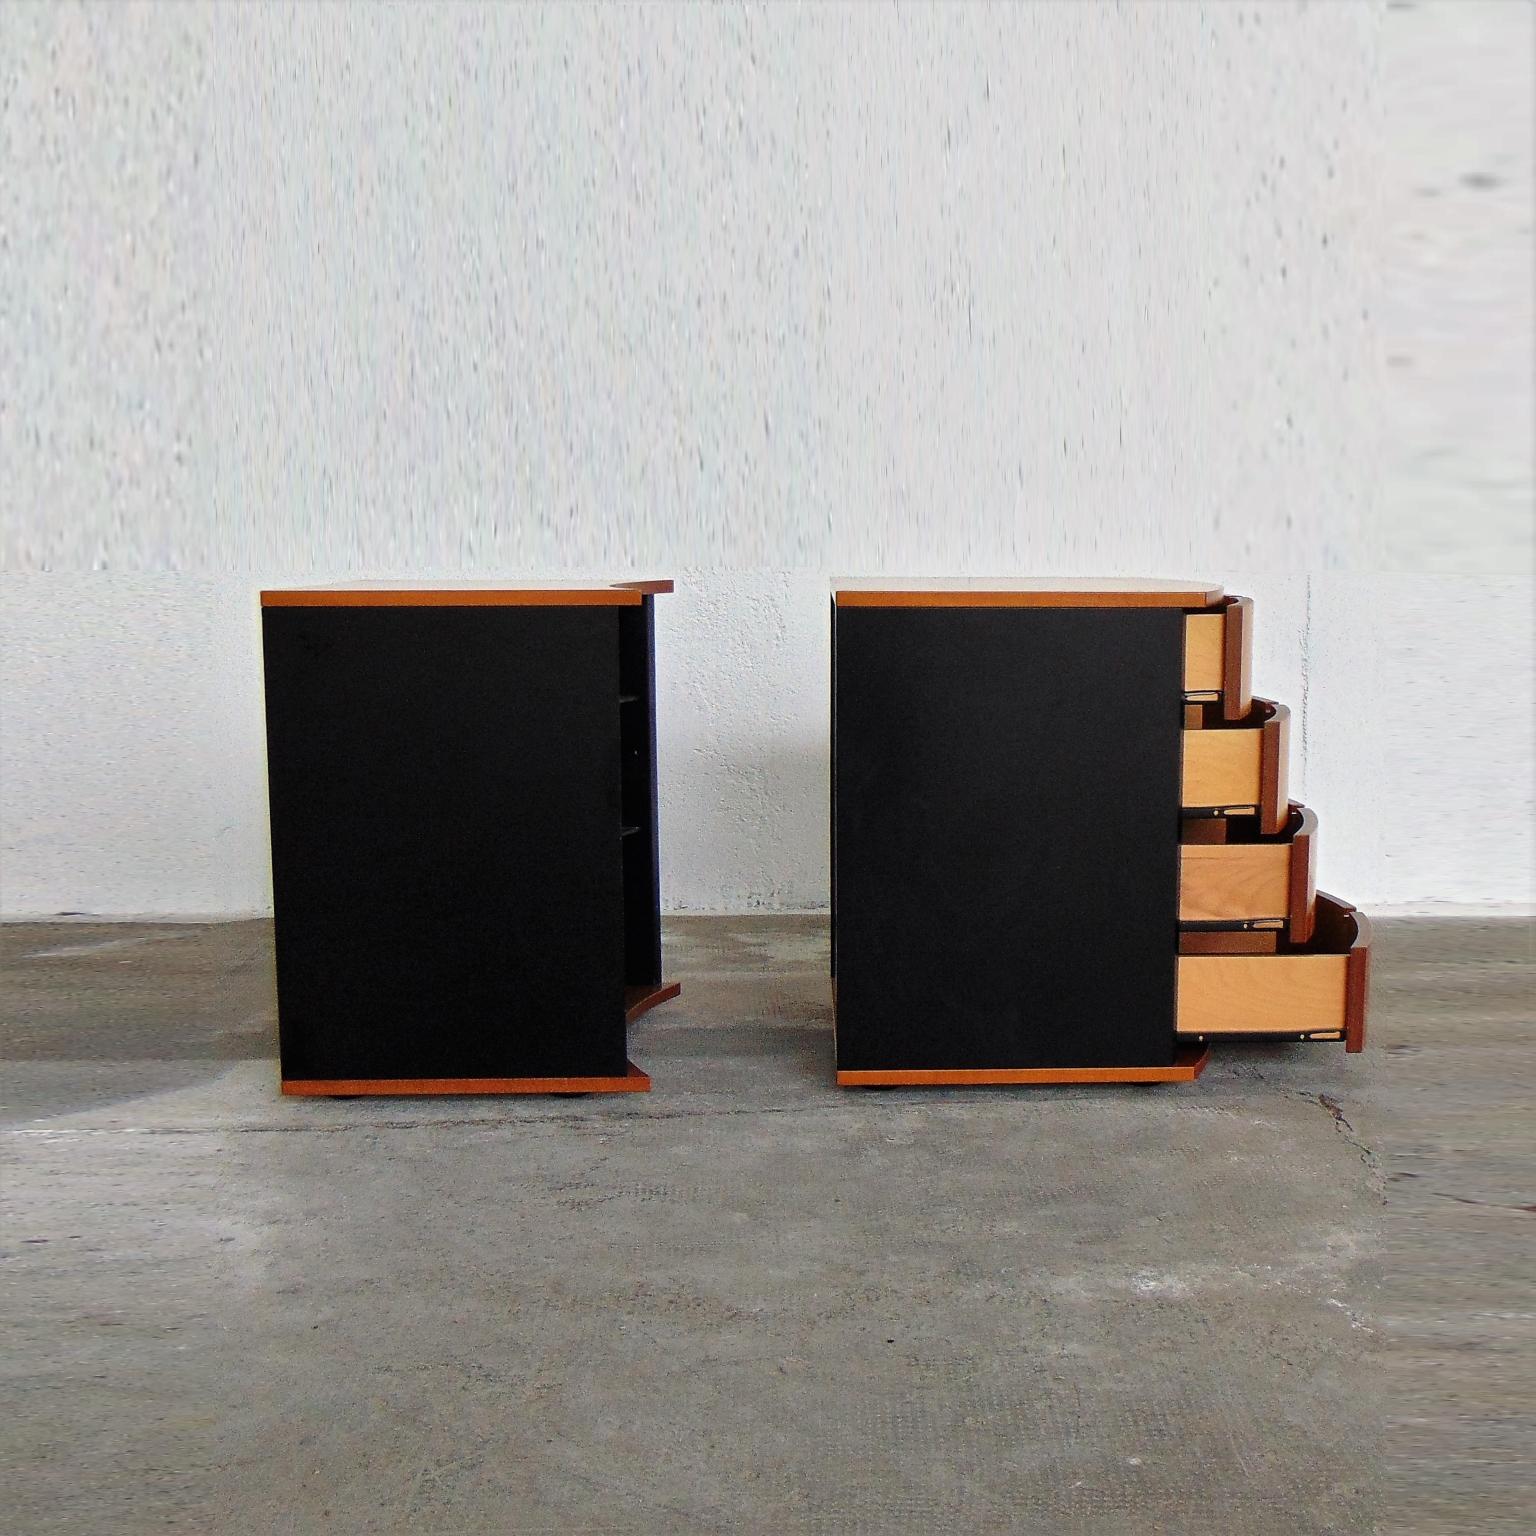 Late 20th Century 1990s Set of 2 Nightstands Walnut Stained Cherry and Black Lacquer, Roche Bobois For Sale